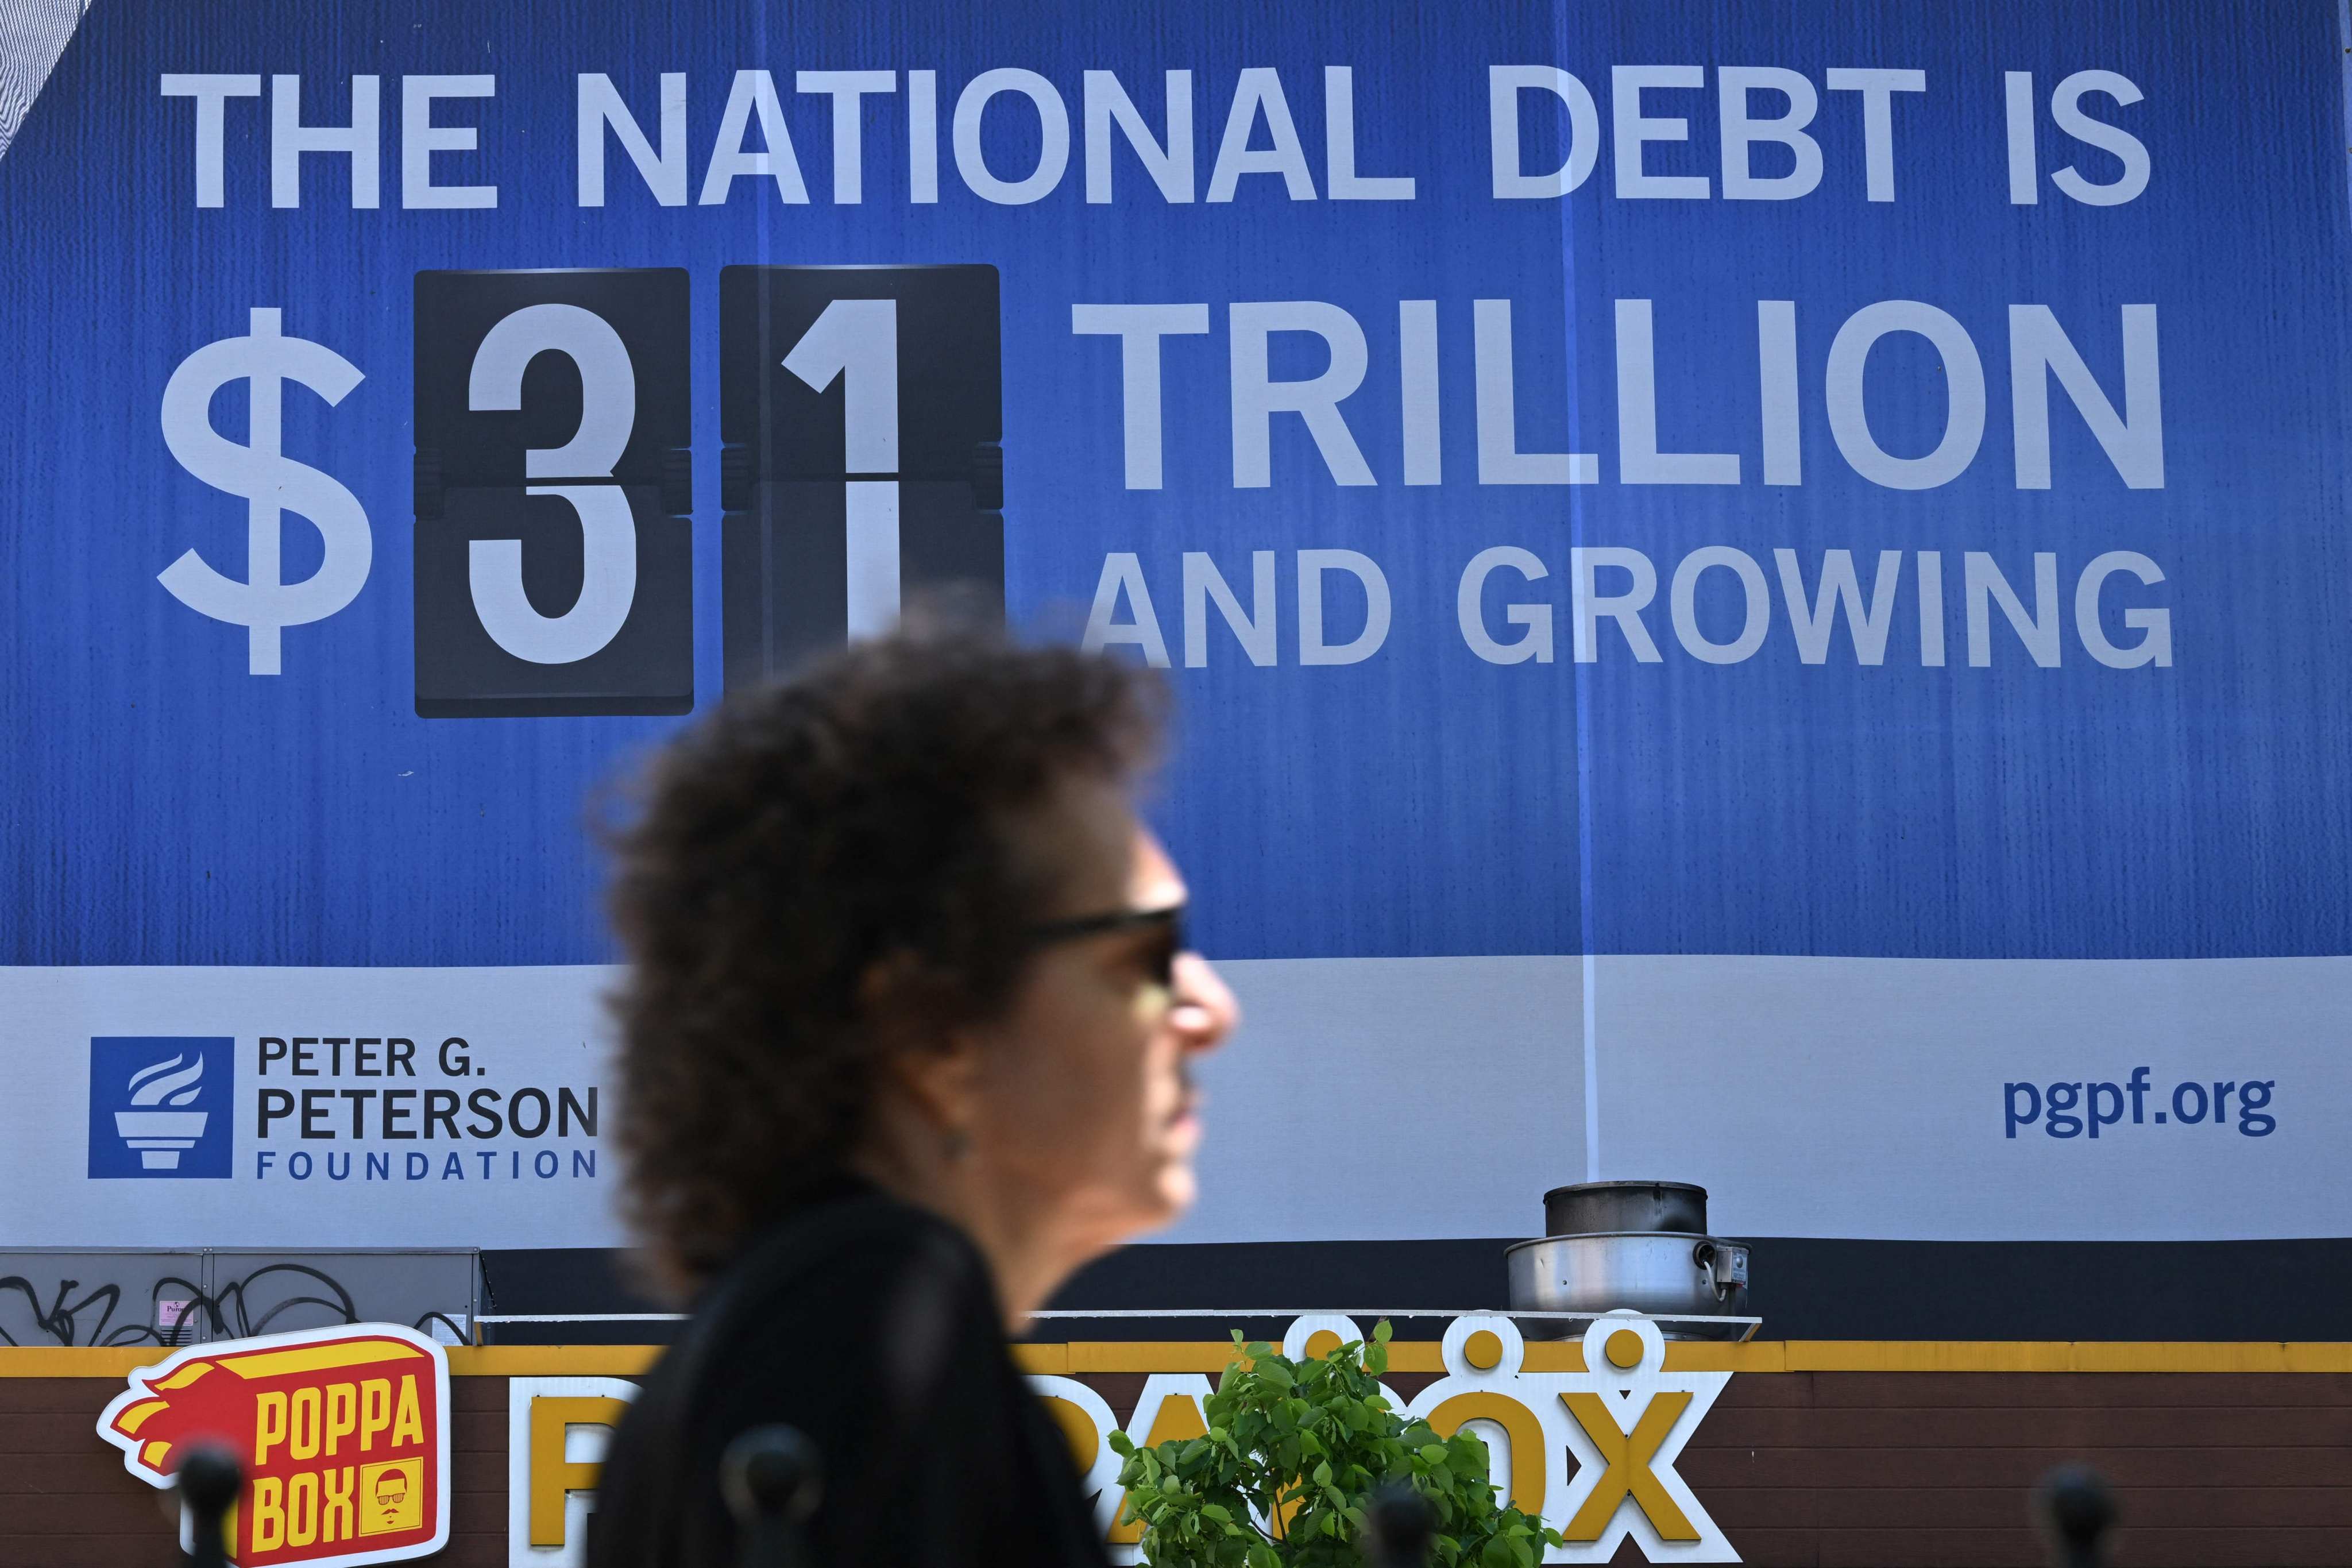 A billboard showing the debt limit is seen in Washington, DC on April 17 last year. If, as some scholars say, the US government can always finance its budget deficit, it must still ensure its fiscal and monetary policies serve its objectives. Photo: AFP